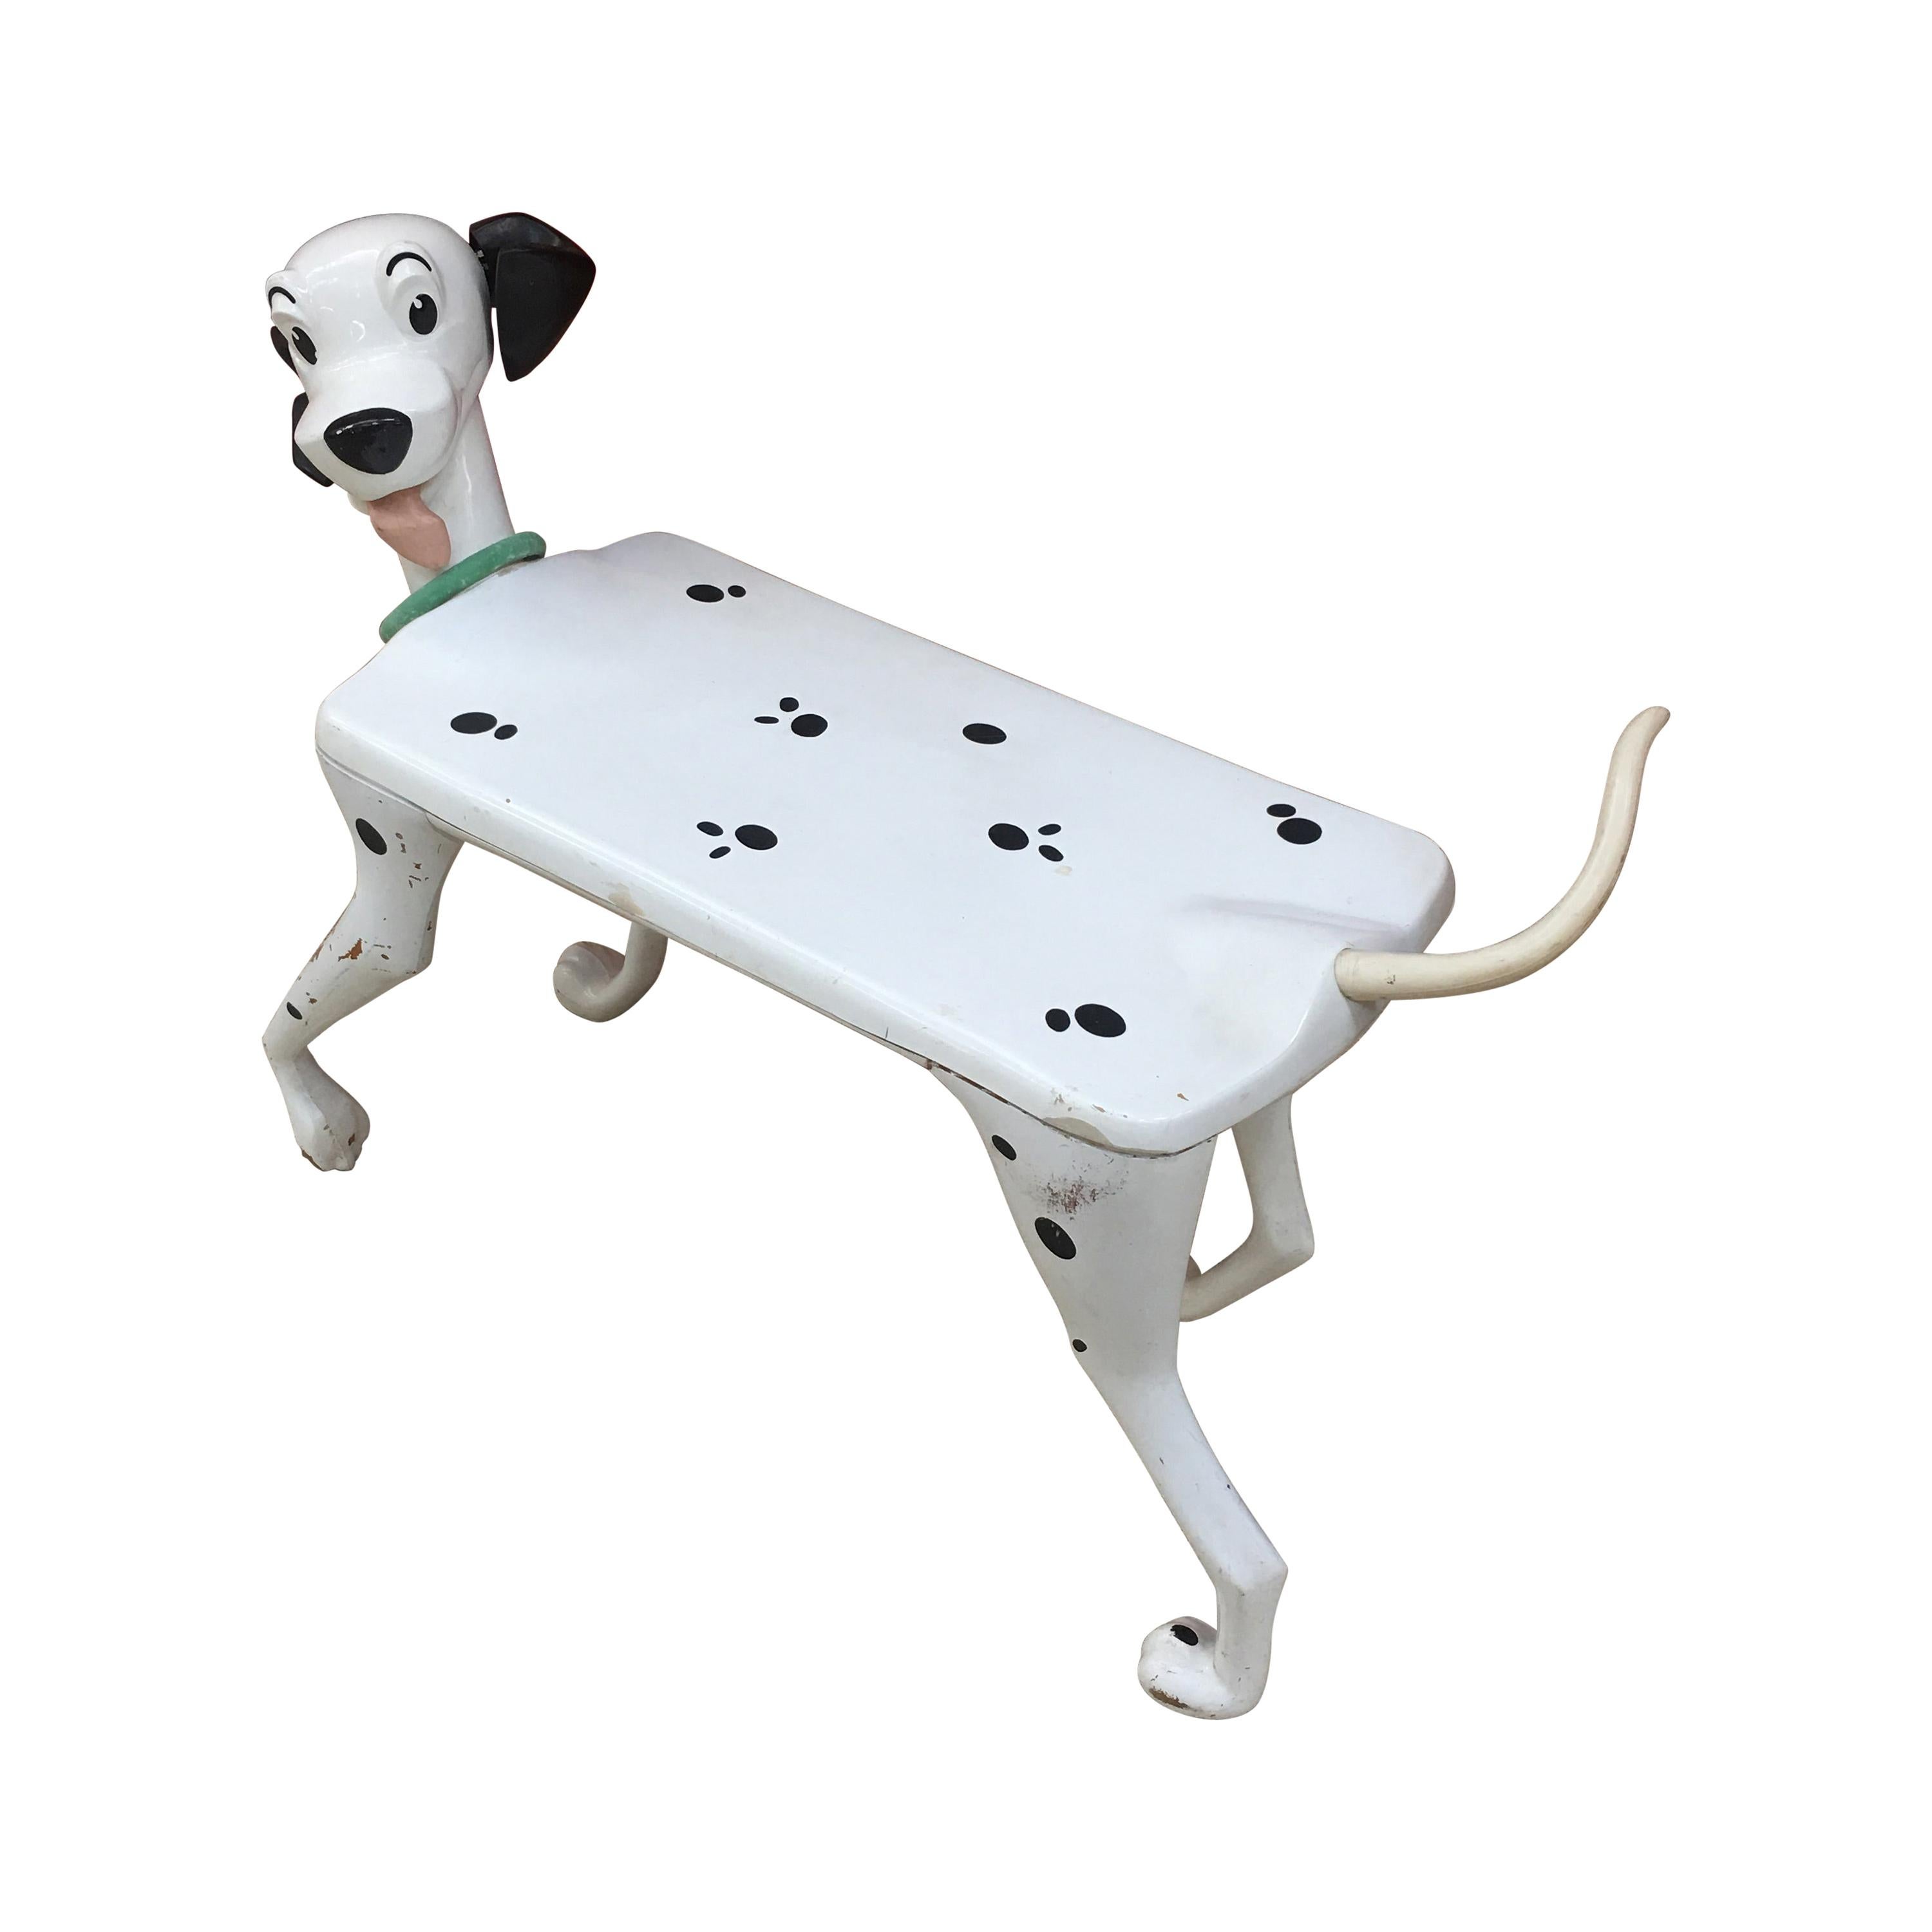 Walt Disney 'After' Child's Desk "Dalmatian" in White and Black Plastic For Sale